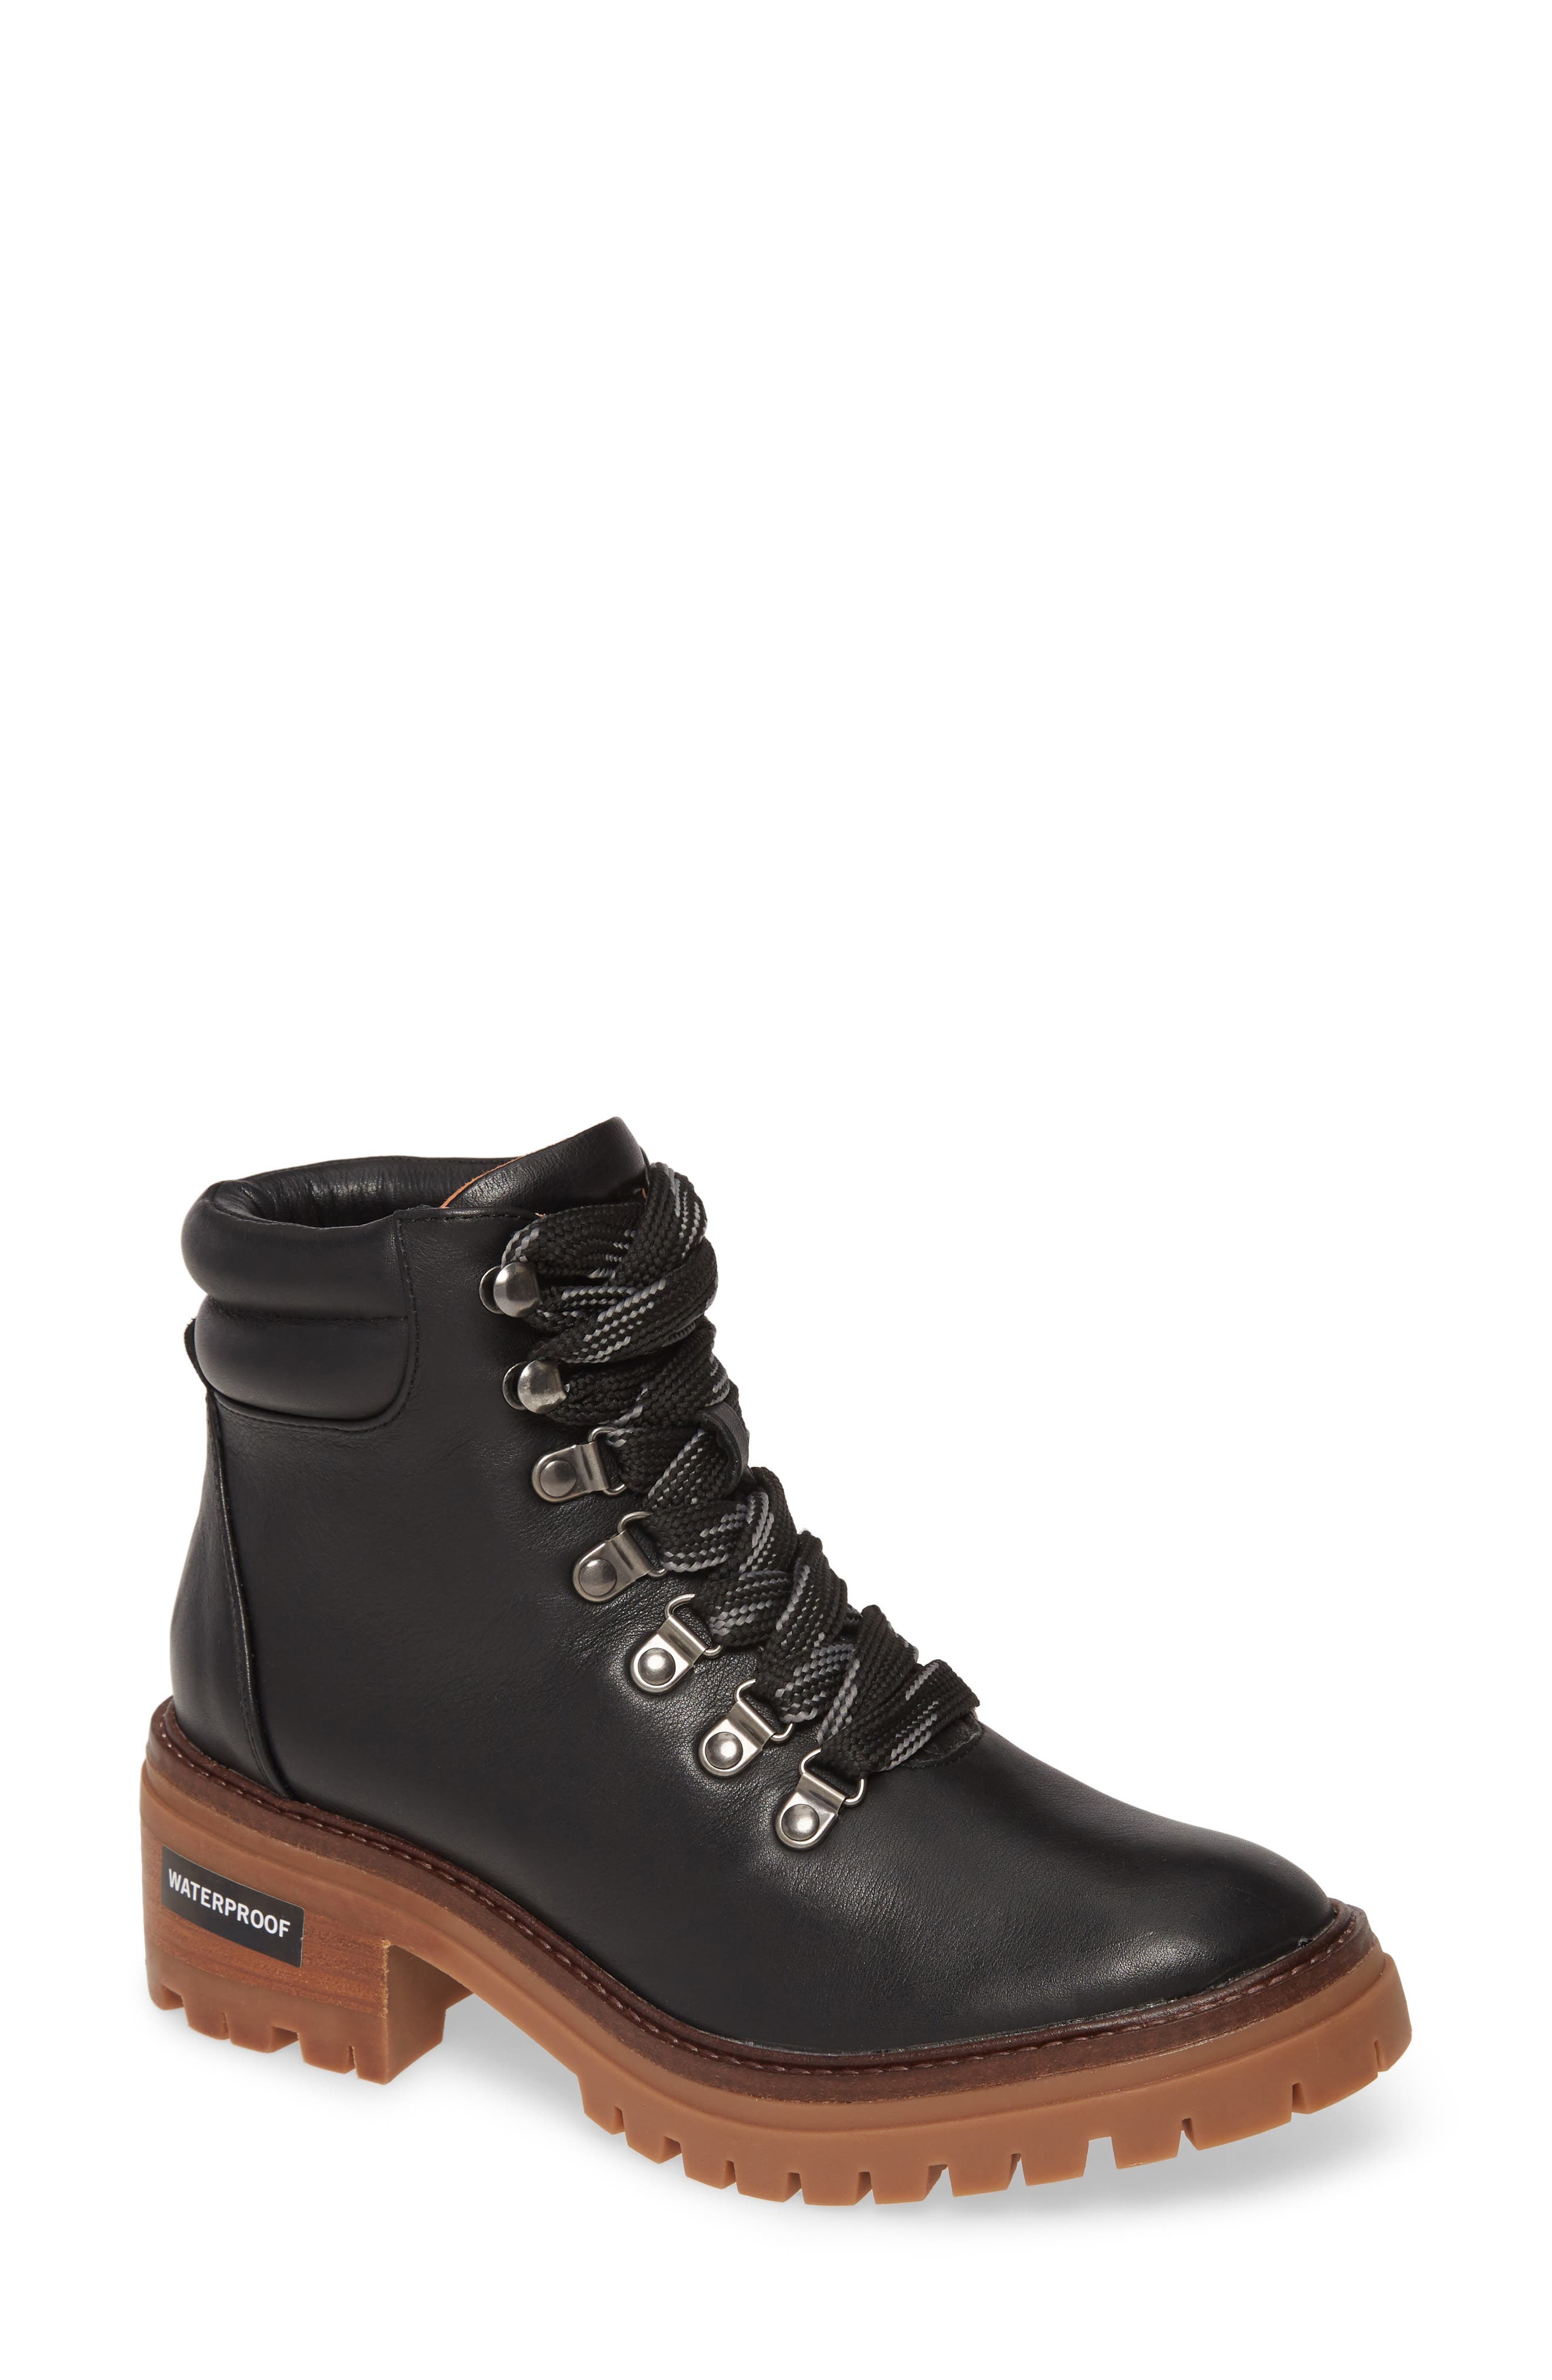 kenneth cole waterproof boots